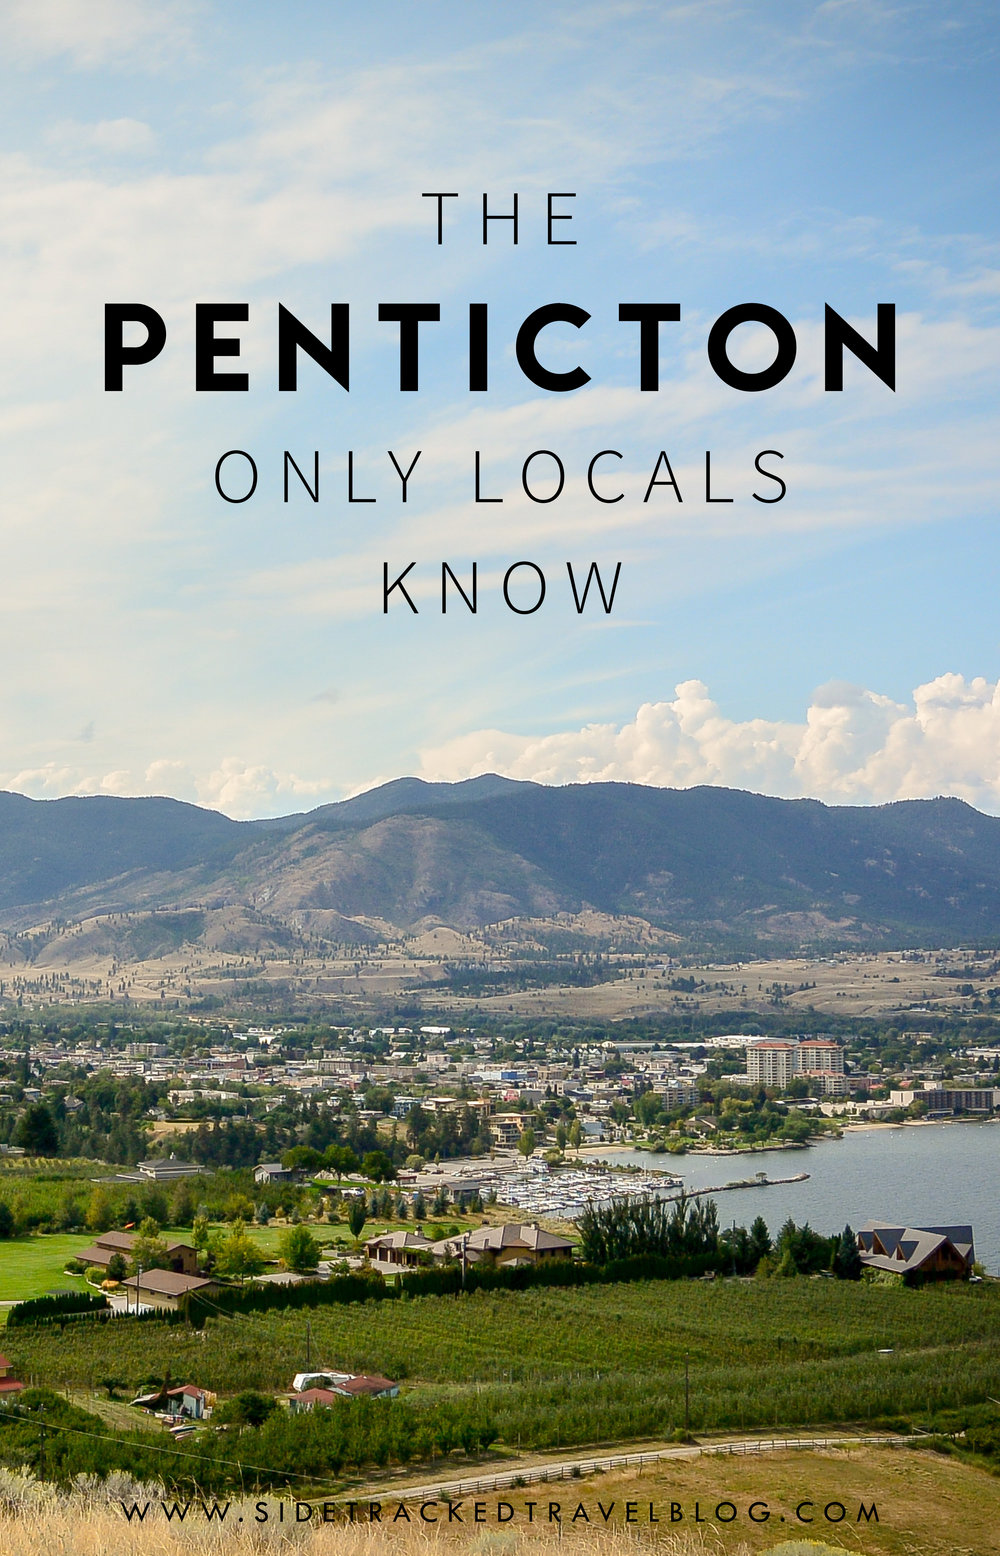 During my childhood, Penticton was the one place I couldn't wait to get away from. But with age, I've come to appreciate and fall in love with this laid-back Okanagan town. Here's my guide on the best things to do in Penticton, including where to eat and my picks of memorable spots you can't miss.